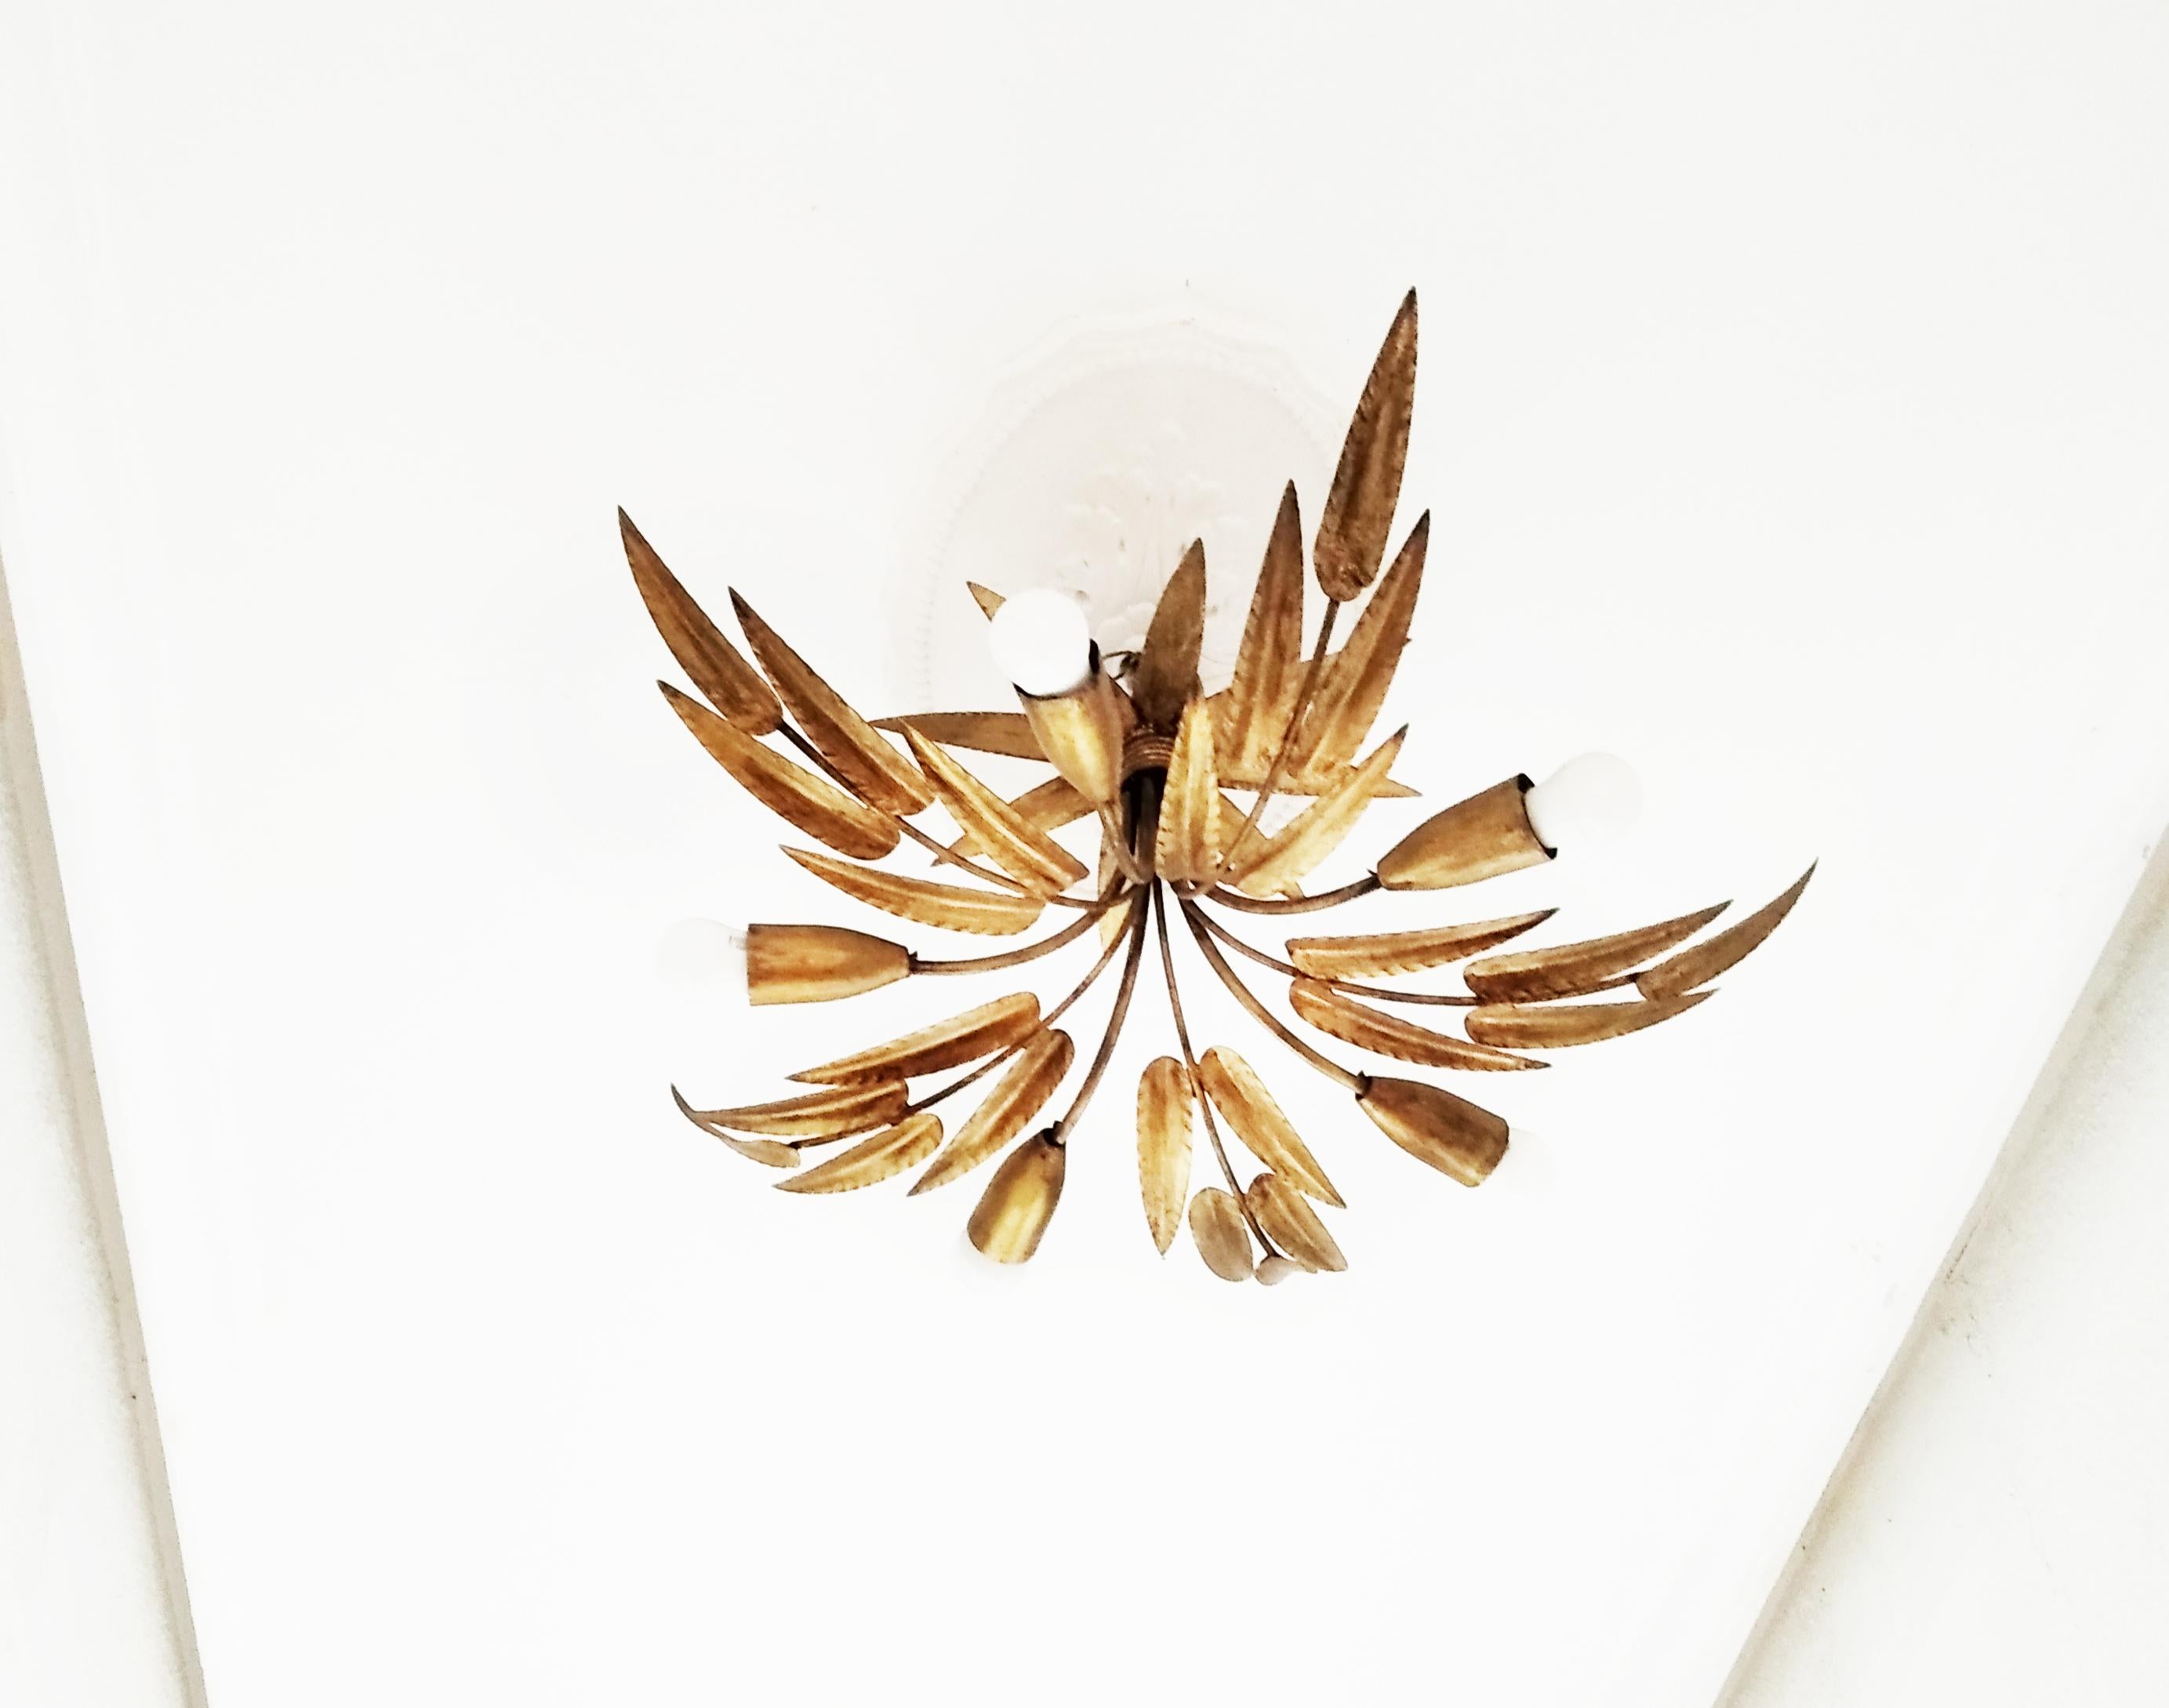 Midcentury Chandelier Golden Leaves Handcrafted Wrought Iron, Spain, 1950s 6